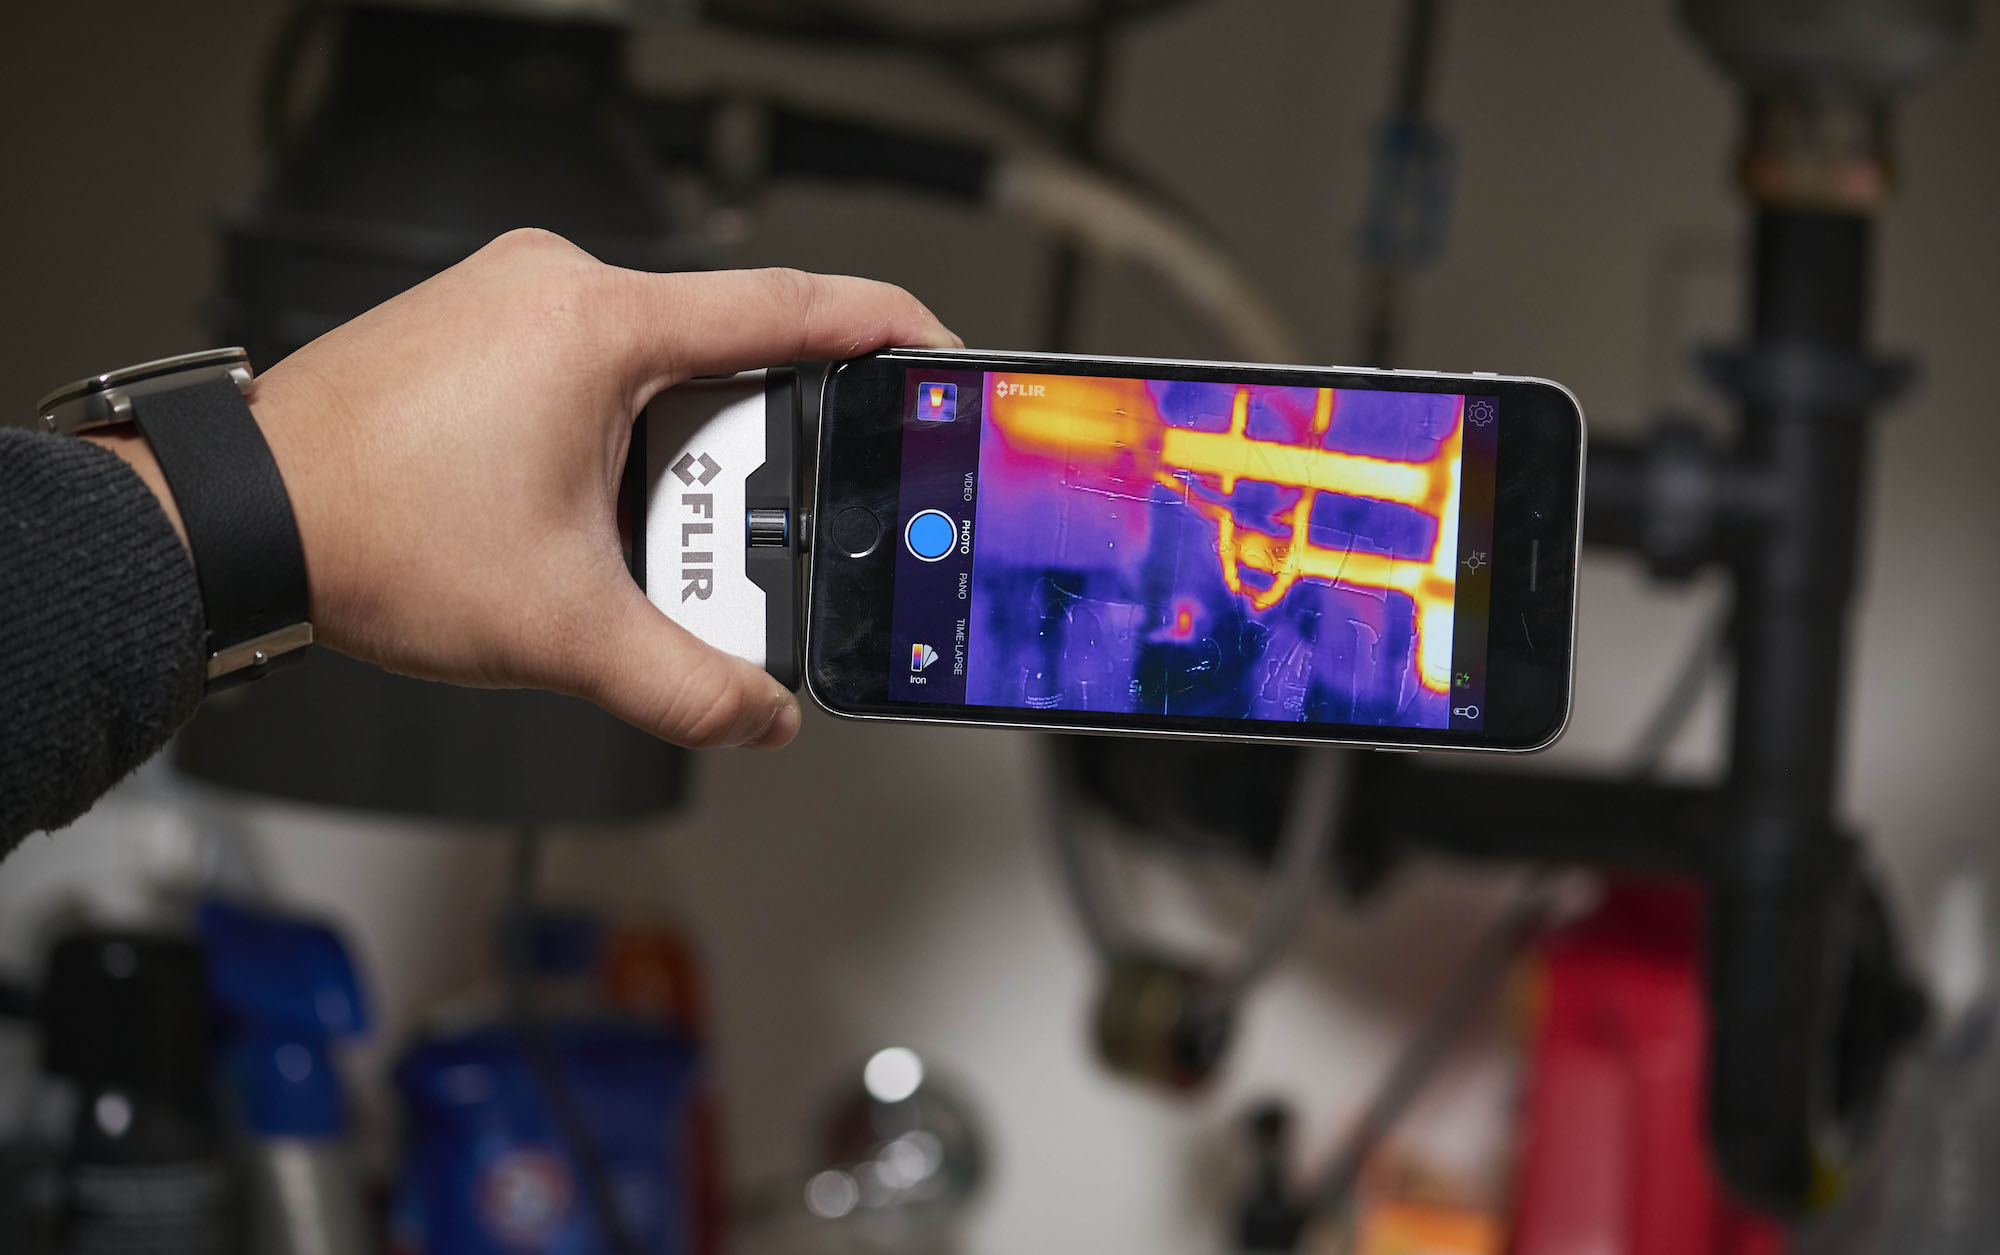 Thermal imaging cameras for smartphones and tablets